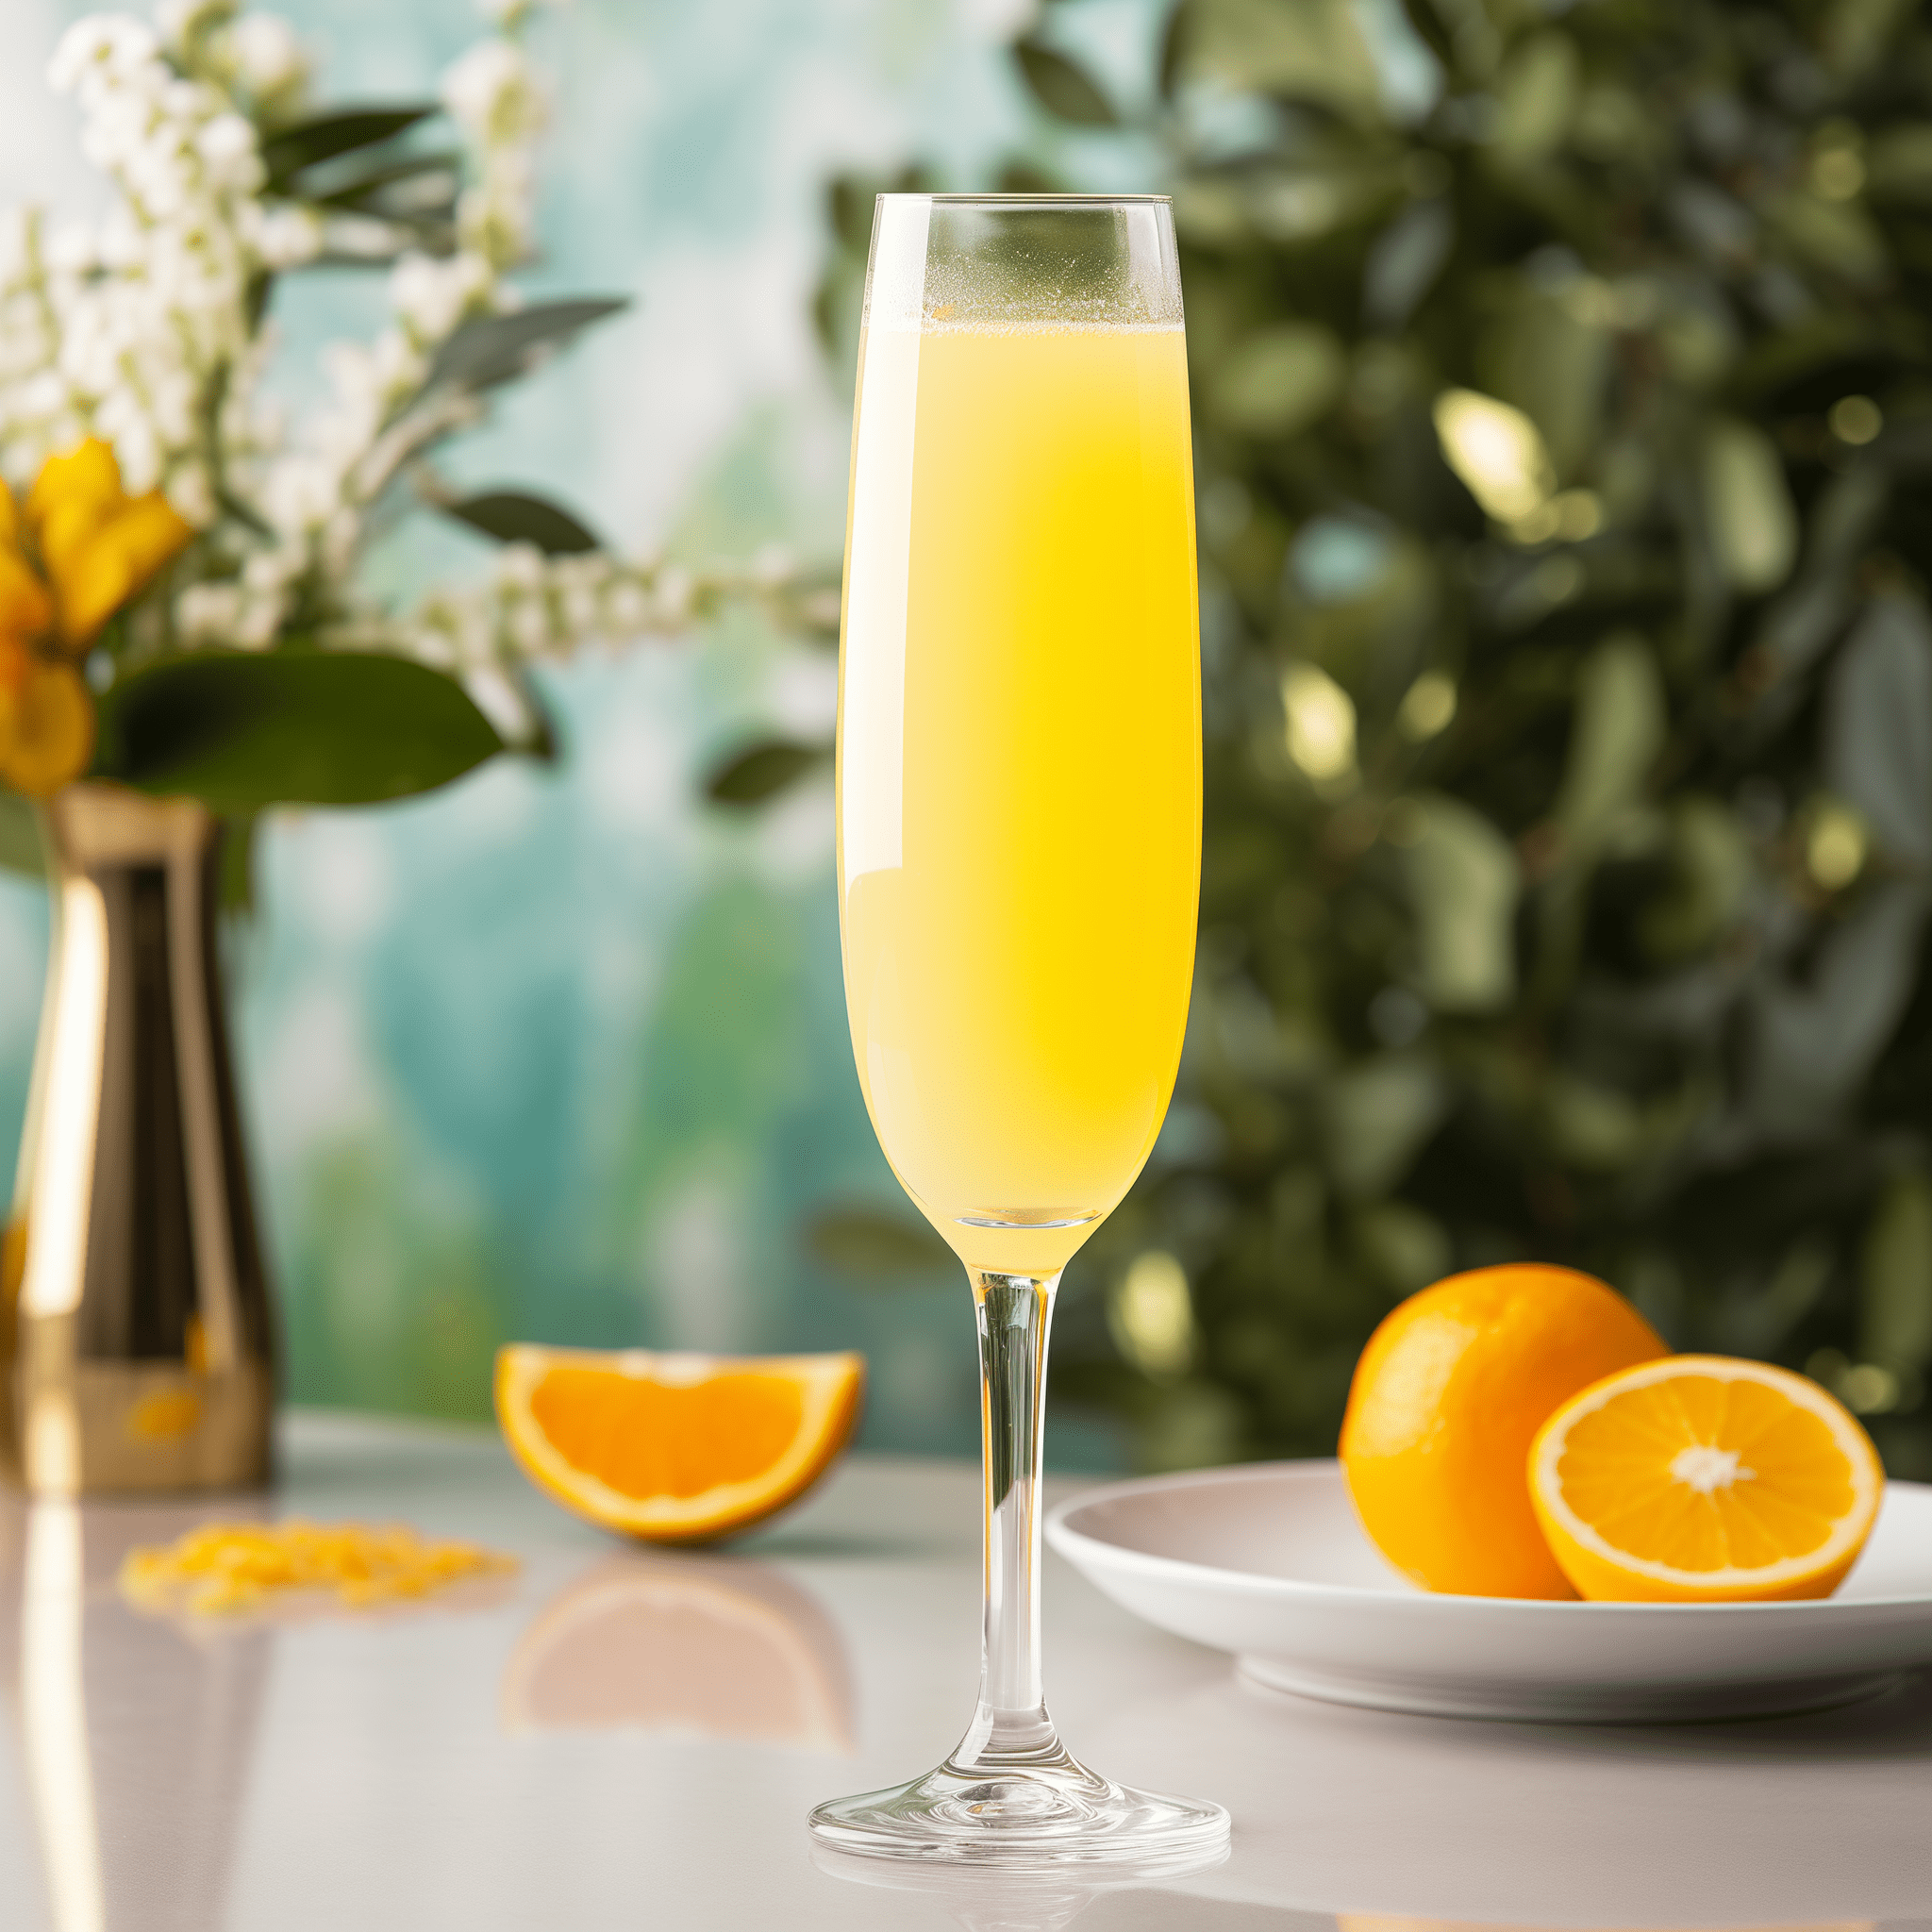 French Mimosa Cocktail Recipe - A French Mimosa is effervescent and refreshing, with a delicate balance of sweet and tart. The citrus from the orange juice provides a zesty freshness, while the champagne adds a sophisticated and slightly yeasty undertone.